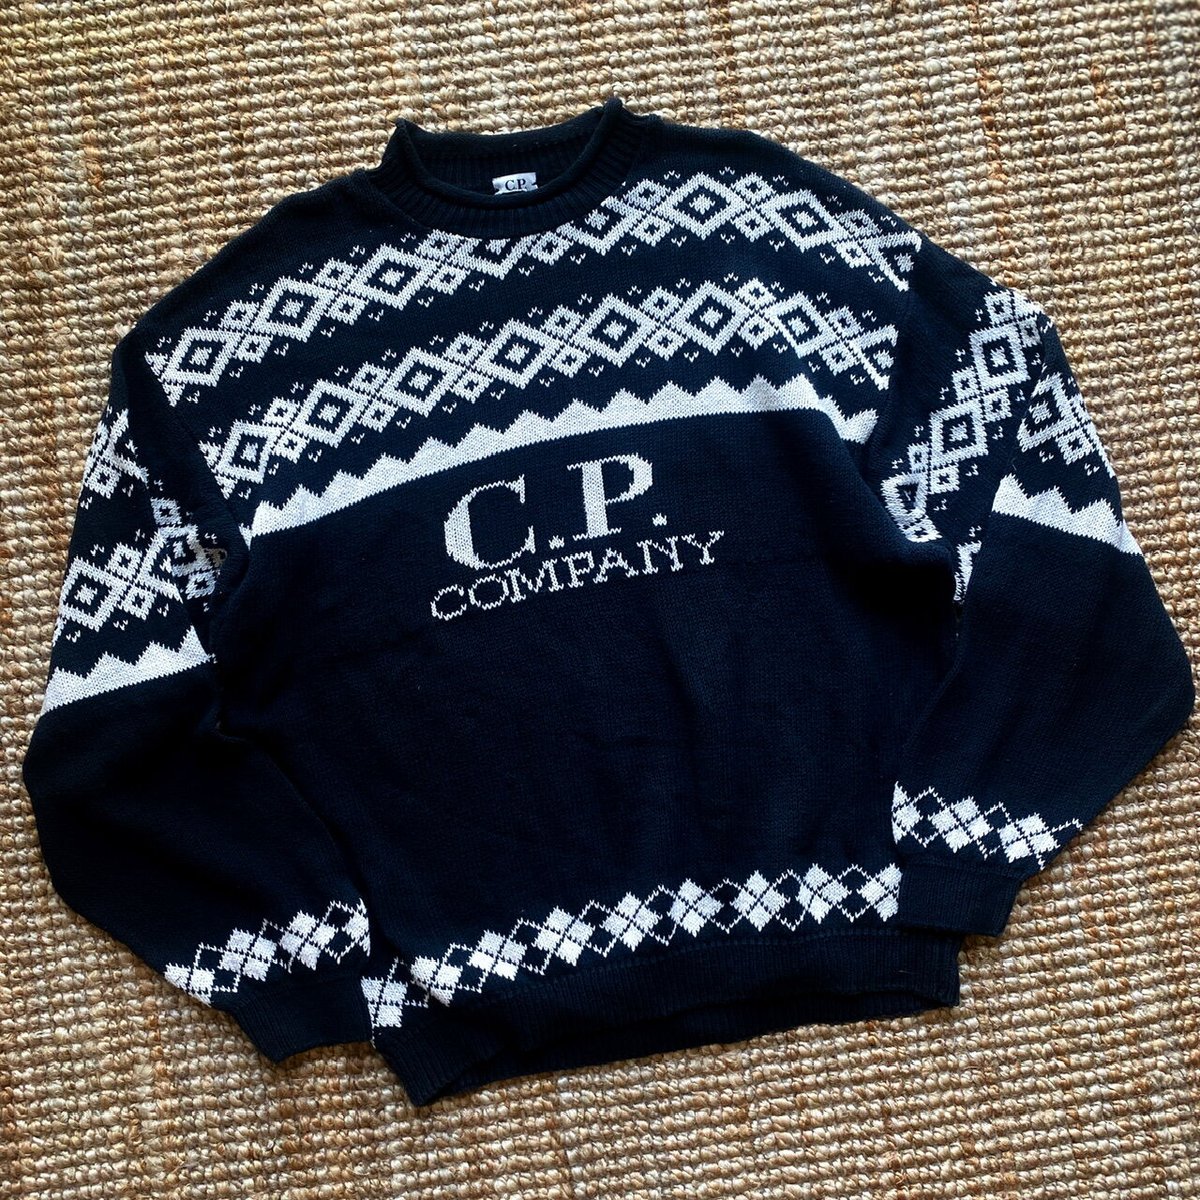 1988AW C.P.COMPANY Spell-Out Cotton Knit Jumper